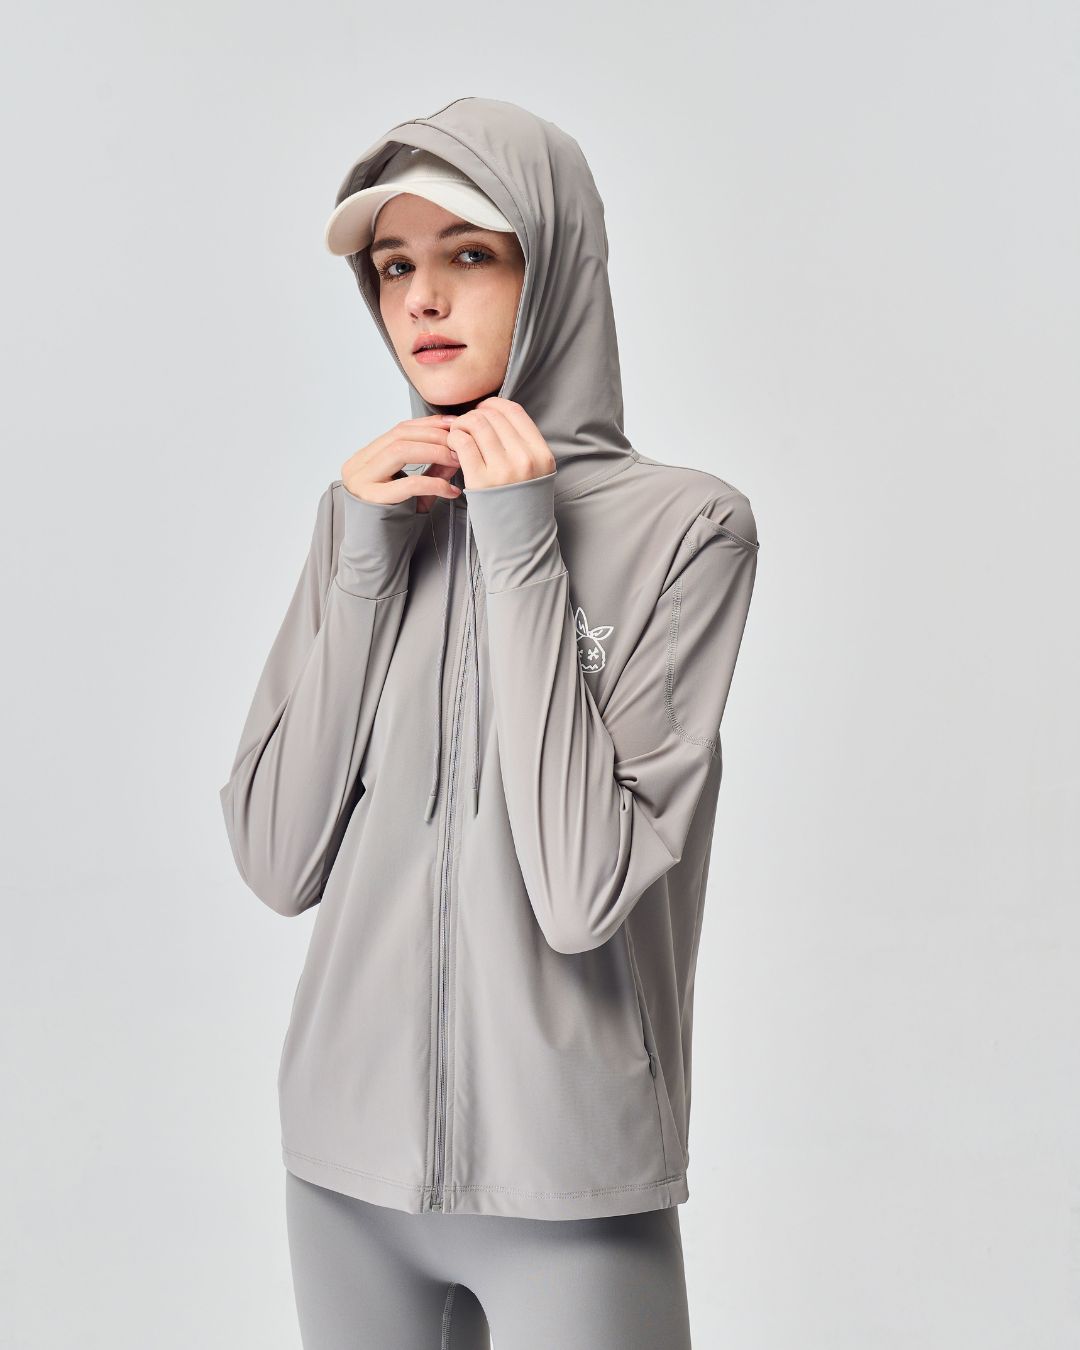 The Bunny UV Protection Lightweight Fullzip Layer